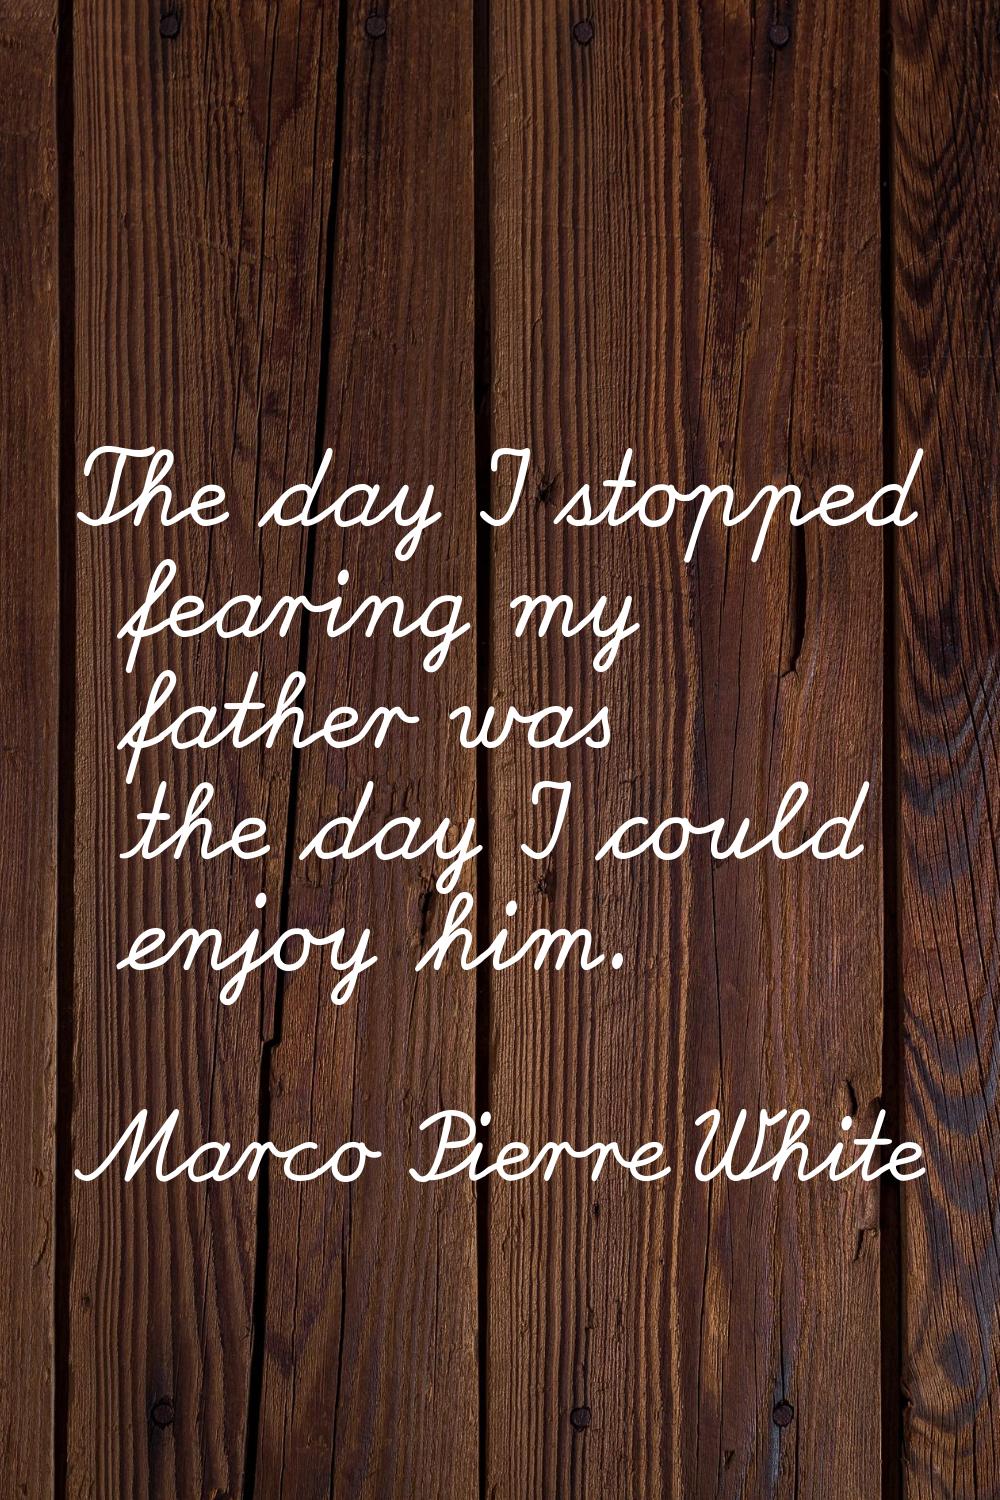 The day I stopped fearing my father was the day I could enjoy him.